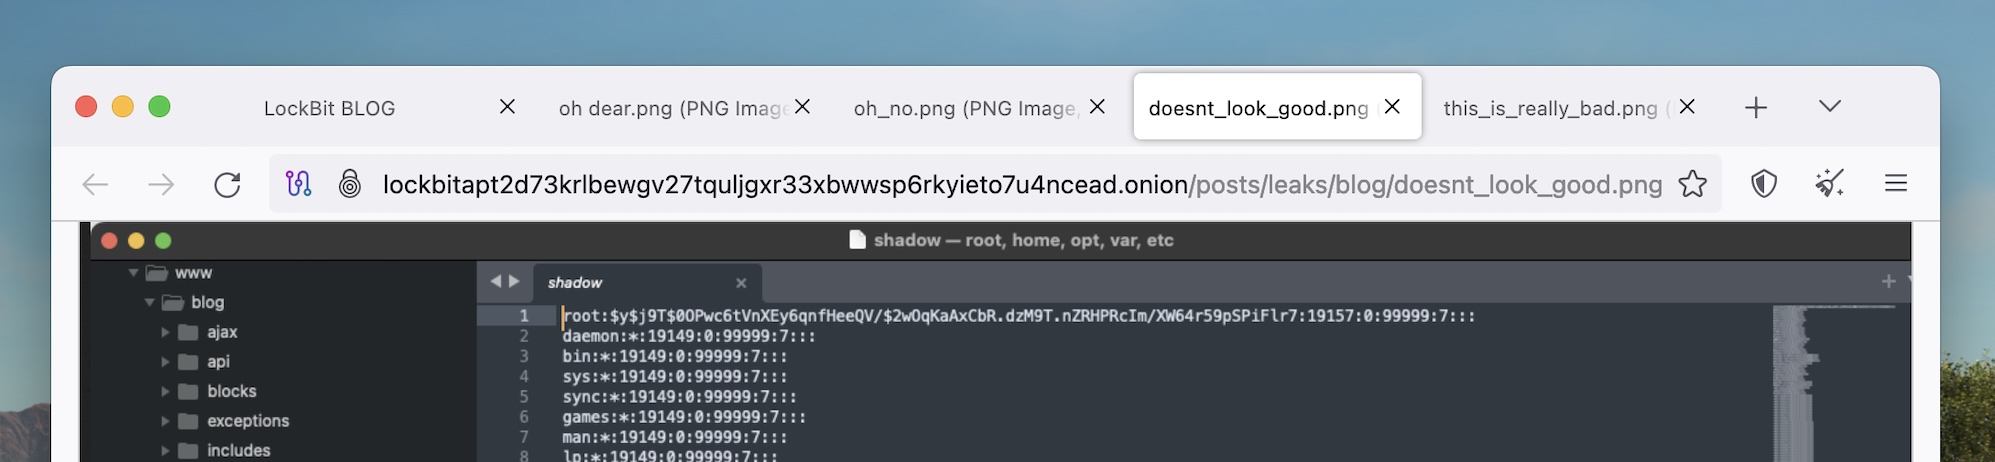 a photo of several open Tor tabs, featuring file names such as, “oh dear.png," "doesnt_look_good.png" and "this_is_really_bad.png."